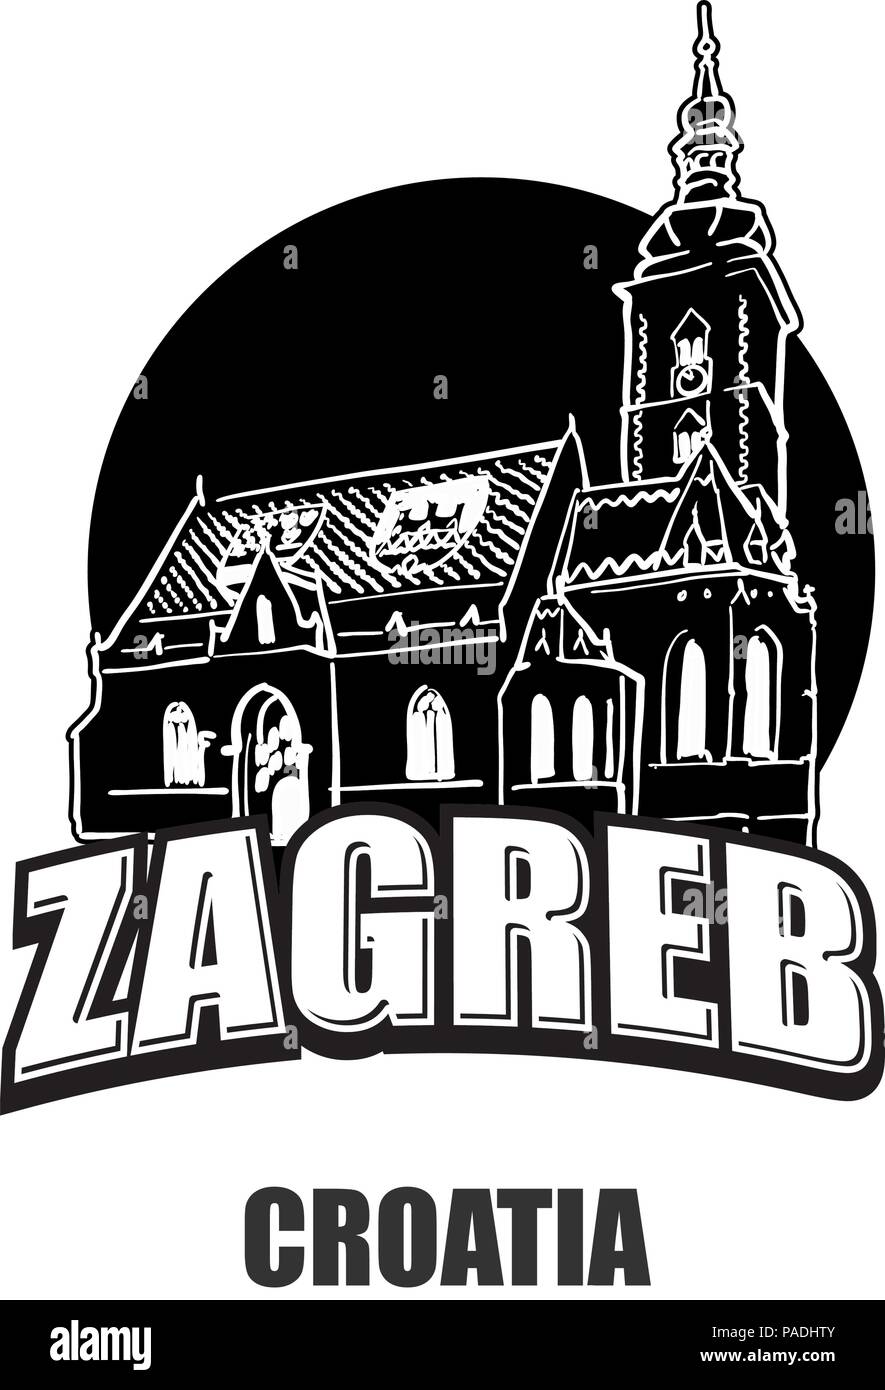 Zagreb, Croatia, black and white logo for high quality prints. Hand drawn vector sketch. Stock Vector